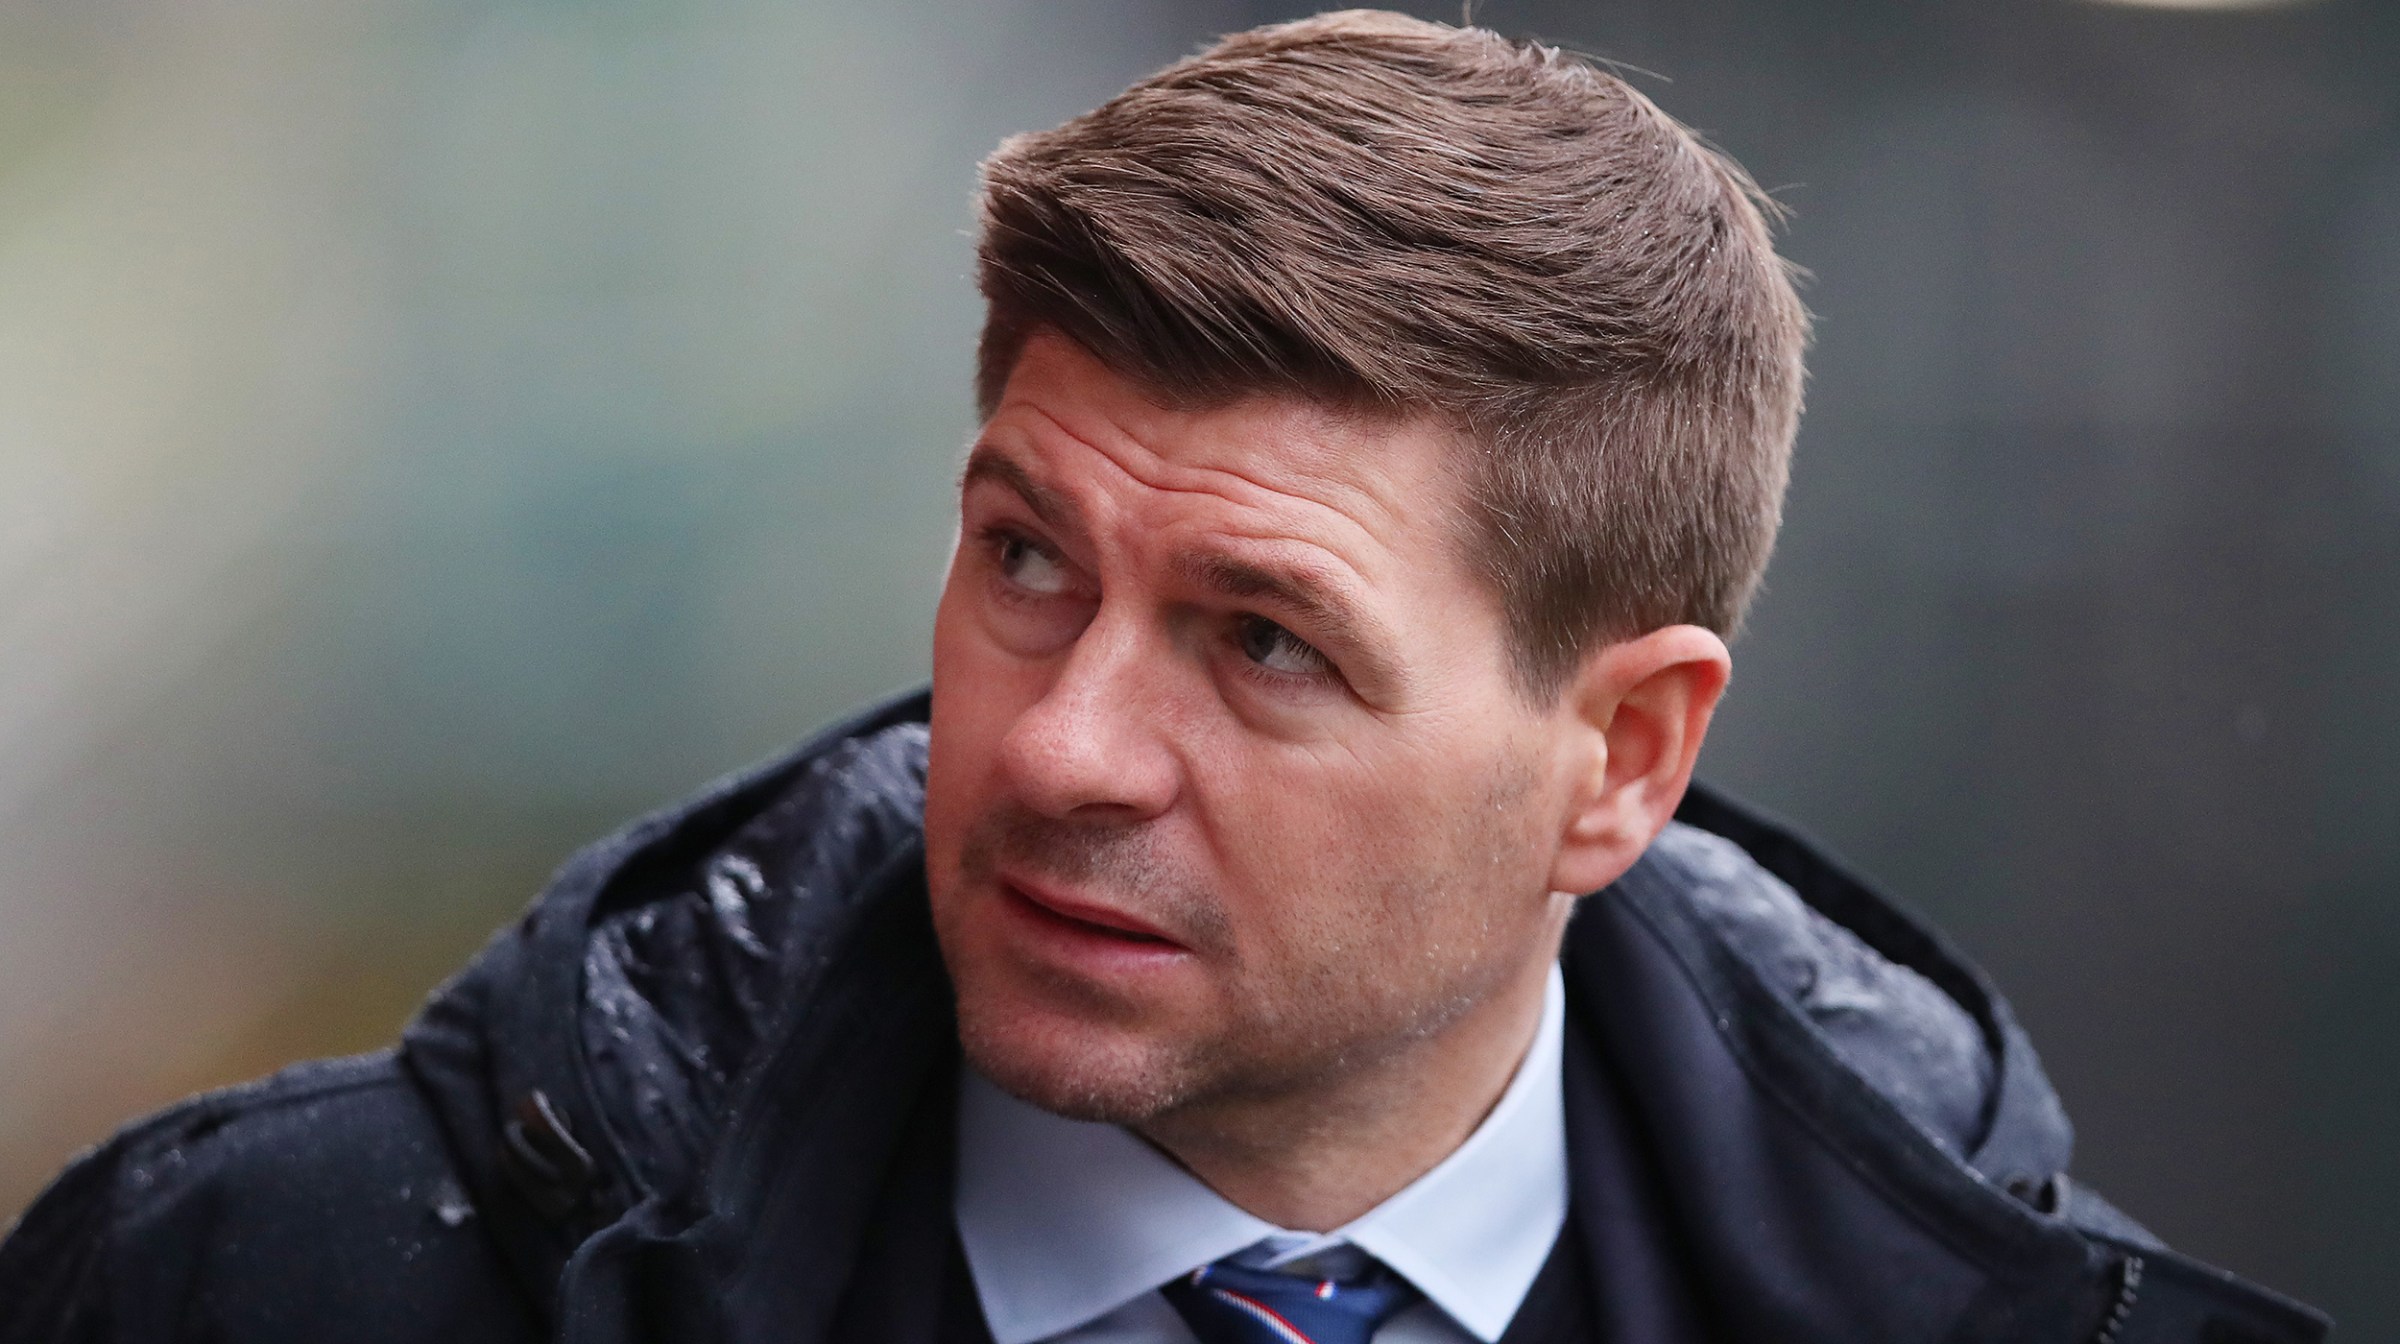 Steven Gerrard, Manager of Rangers FC arrives at the stadium prior to the Cinch Scottish Premiership match between Motherwell FC and Rangers FC at Fir Park on October 31, 2021 in Motherwell, Scotland.